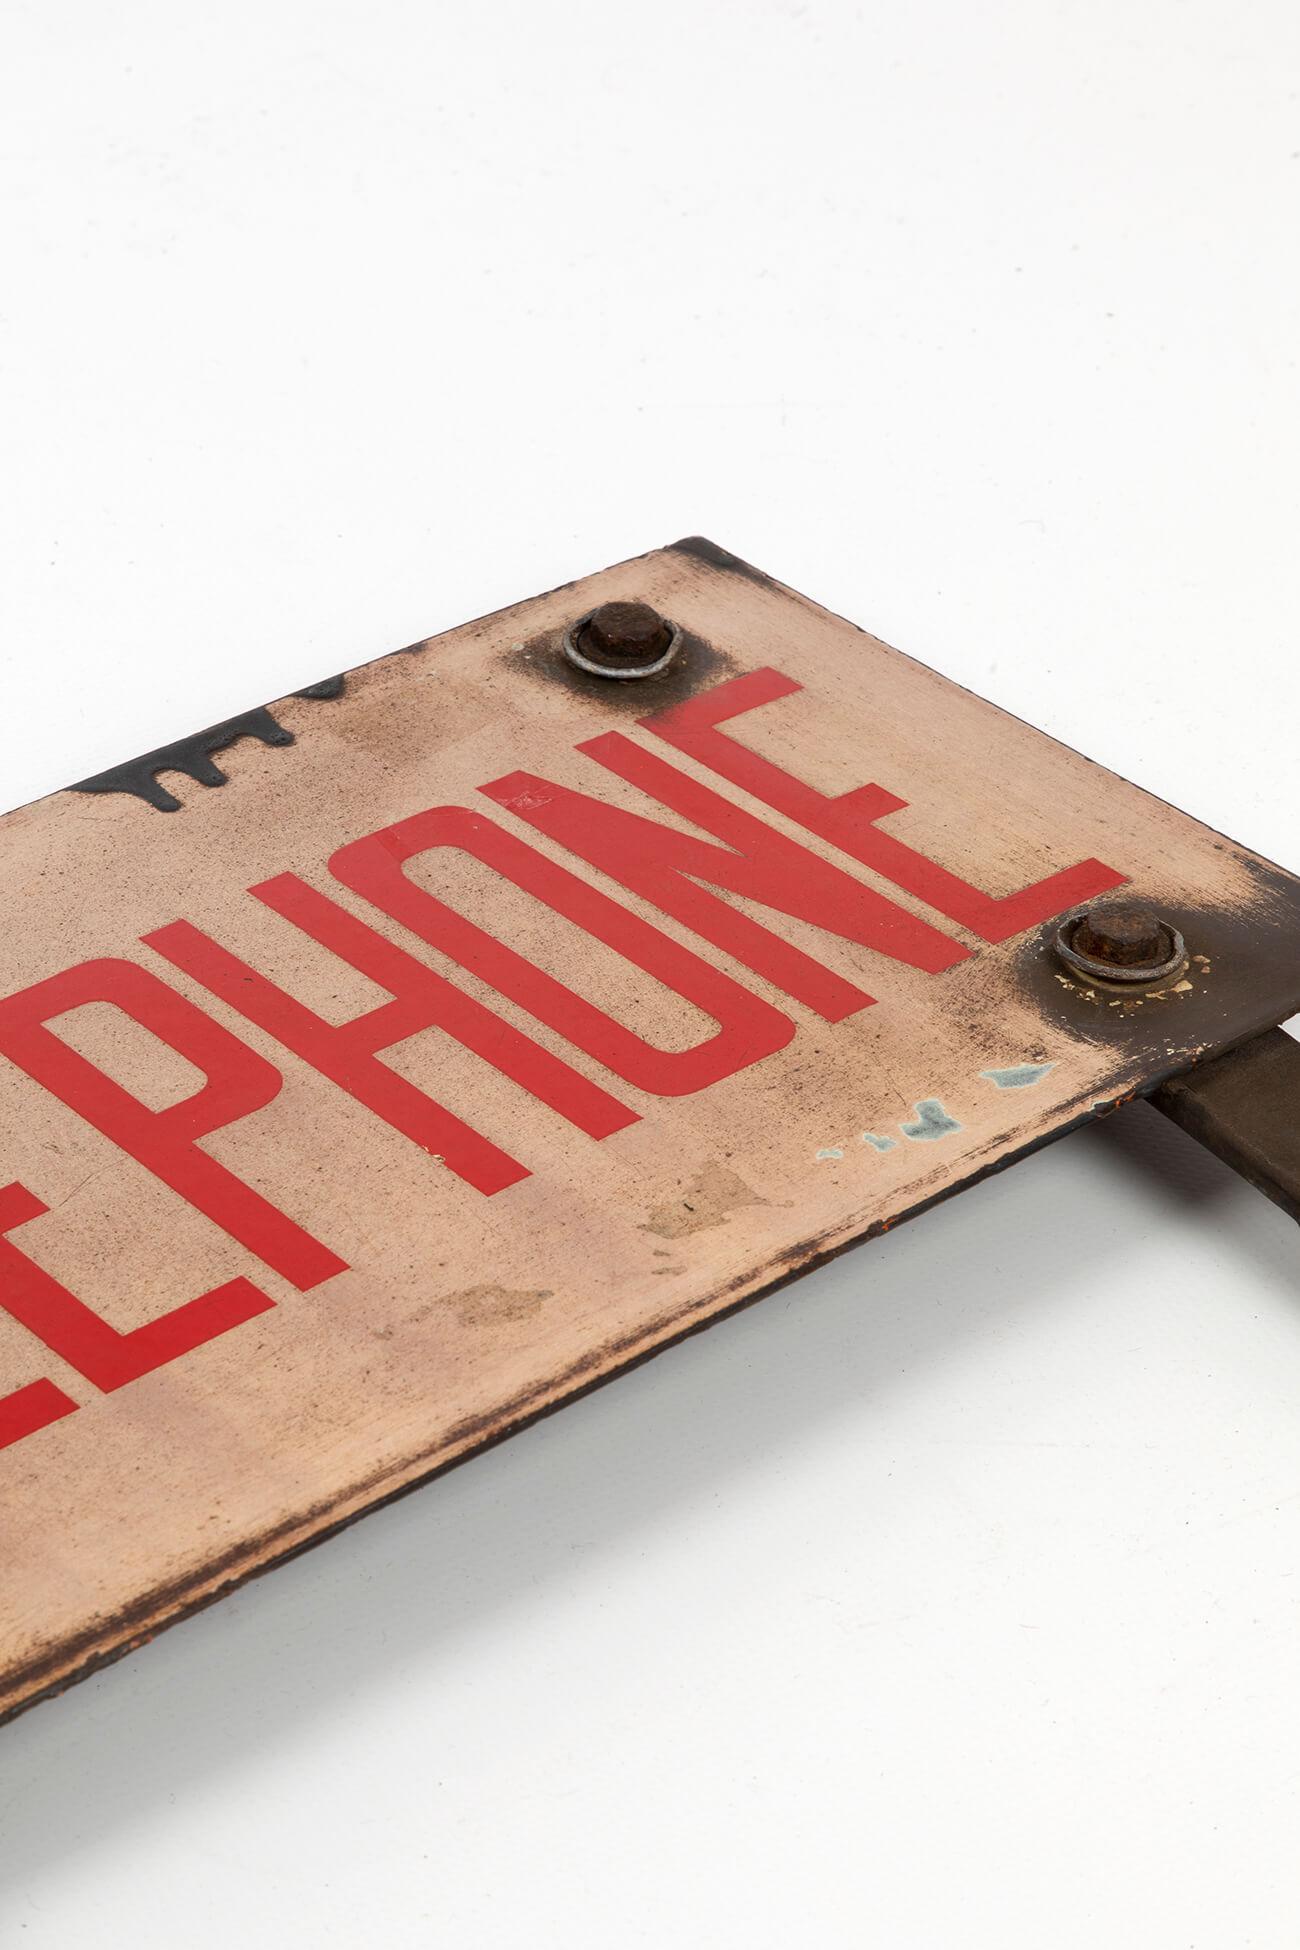 Enameled Industrial Enamel Telephone Sign, circa 1950s For Sale